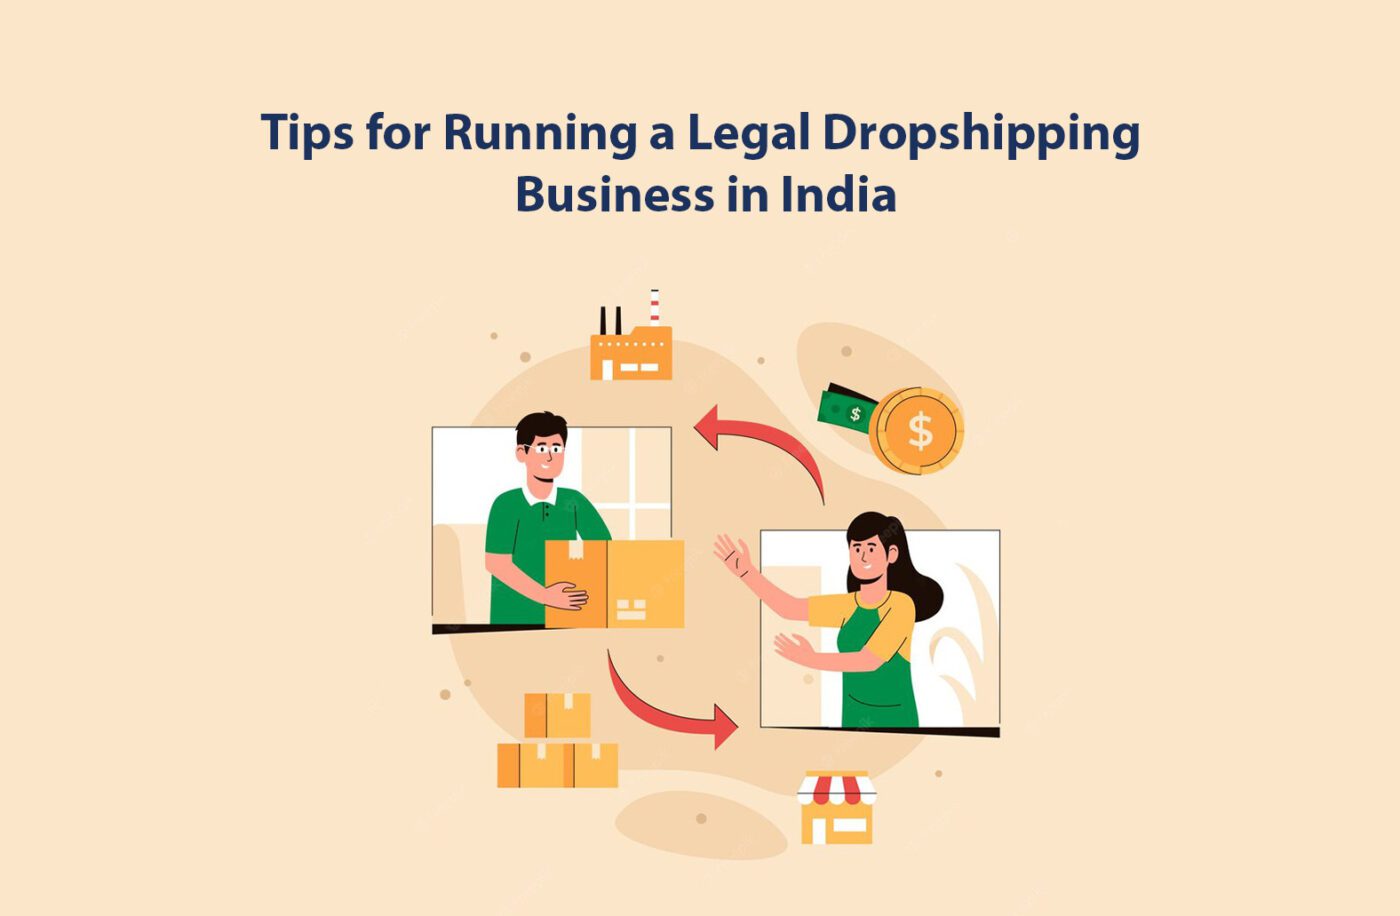 Tips for Running a Legal Dropshipping Business in India